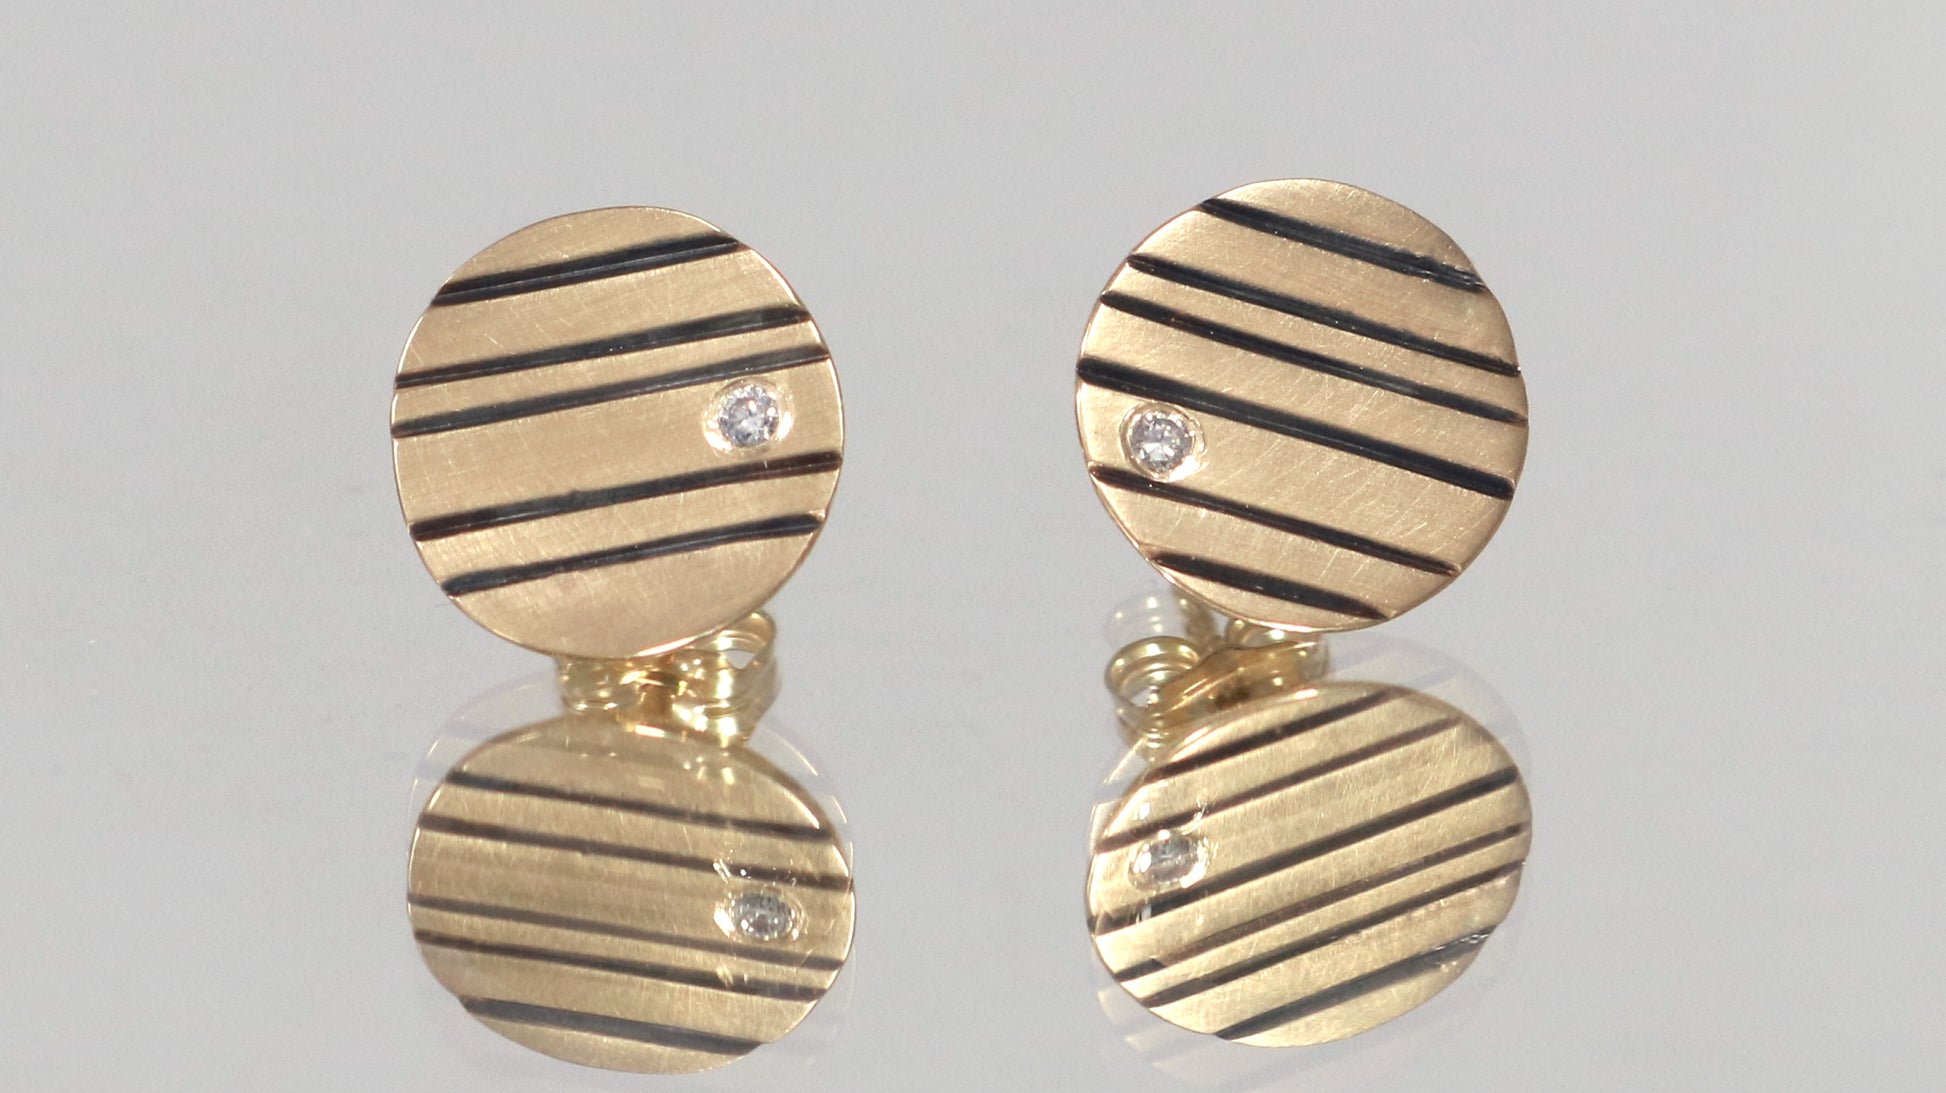 Round 14k gold disc studs with black lines randomly spaced and a single white diamond flush set at the edge.